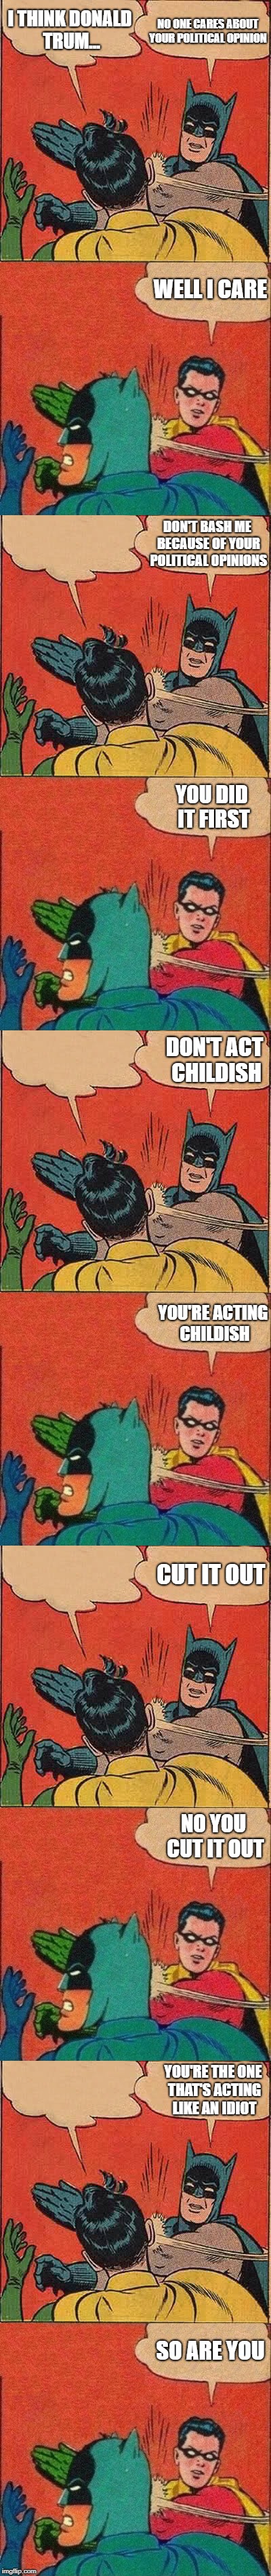 Batman and Robin slapping each other | NO ONE CARES ABOUT YOUR POLITICAL OPINION; I THINK DONALD TRUM... WELL I CARE; DON'T BASH ME BECAUSE OF YOUR POLITICAL OPINIONS; YOU DID IT FIRST; DON'T ACT CHILDISH; YOU'RE ACTING CHILDISH; CUT IT OUT; NO YOU CUT IT OUT; YOU'RE THE ONE THAT'S ACTING LIKE AN IDIOT; SO ARE YOU | image tagged in memes,batman slapping robin,robin slaps batman,political meme | made w/ Imgflip meme maker